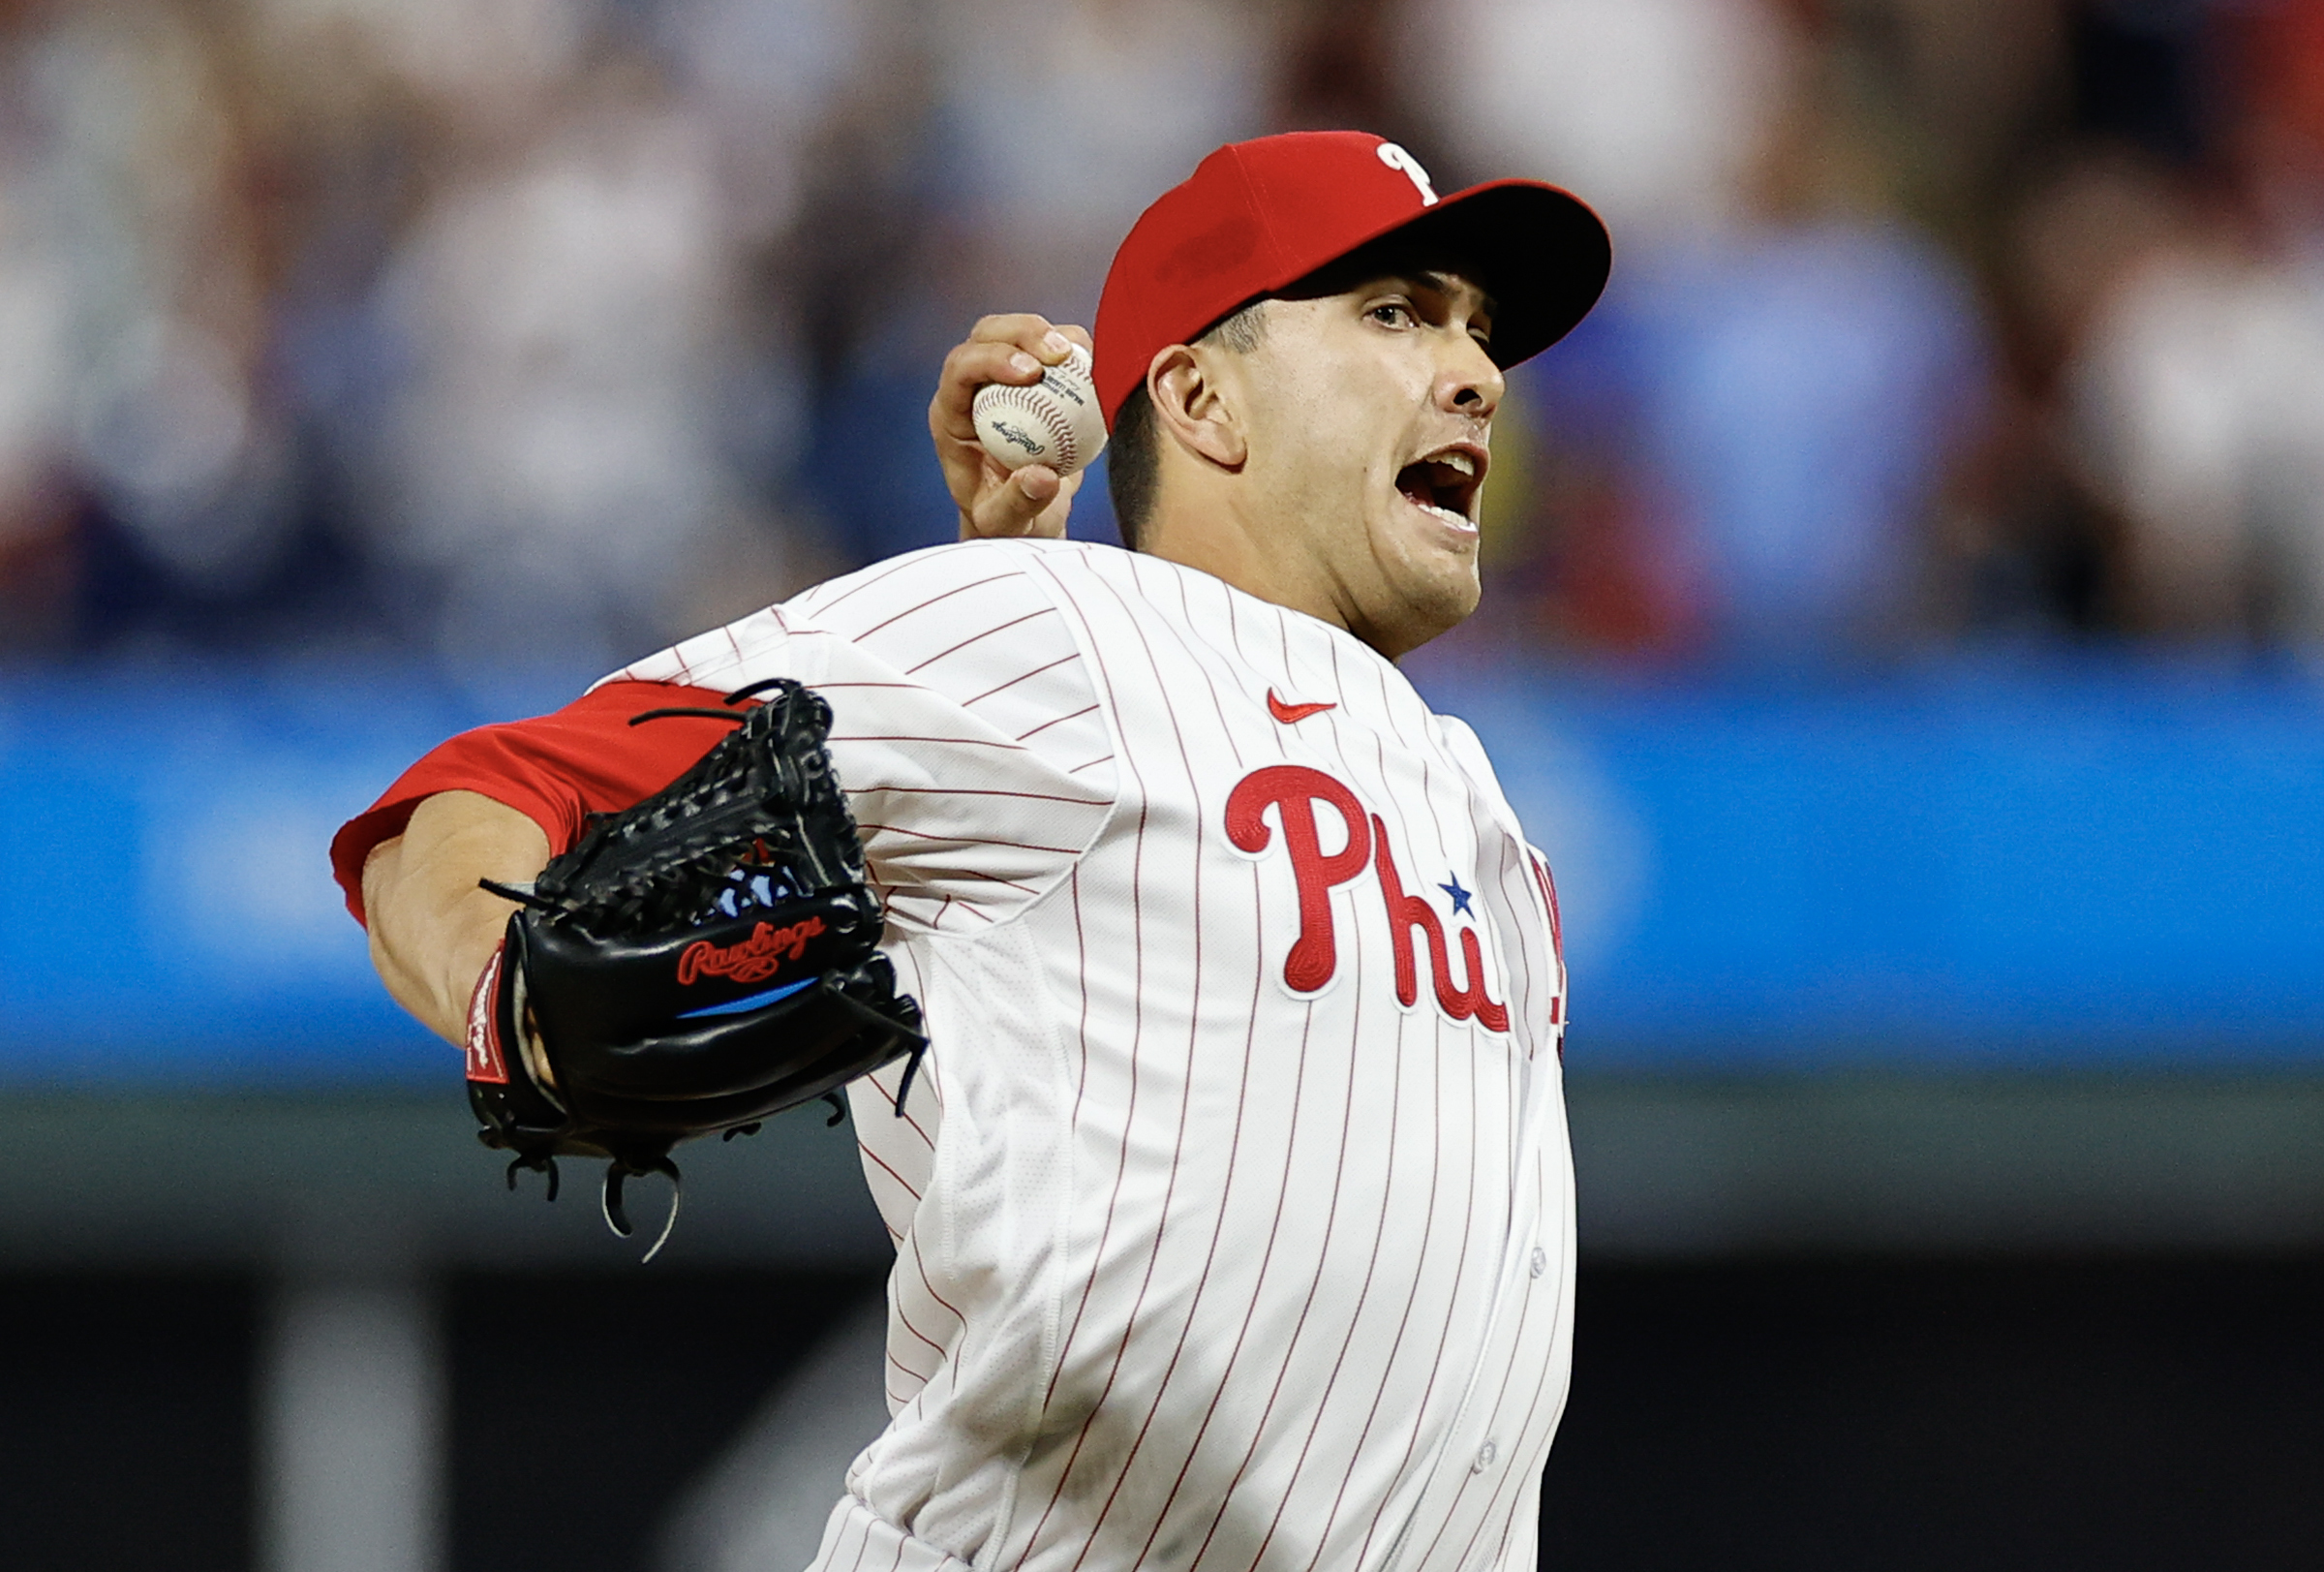 Phillies ace Nola loses no-hitter in seventh, wins game 8-3 over